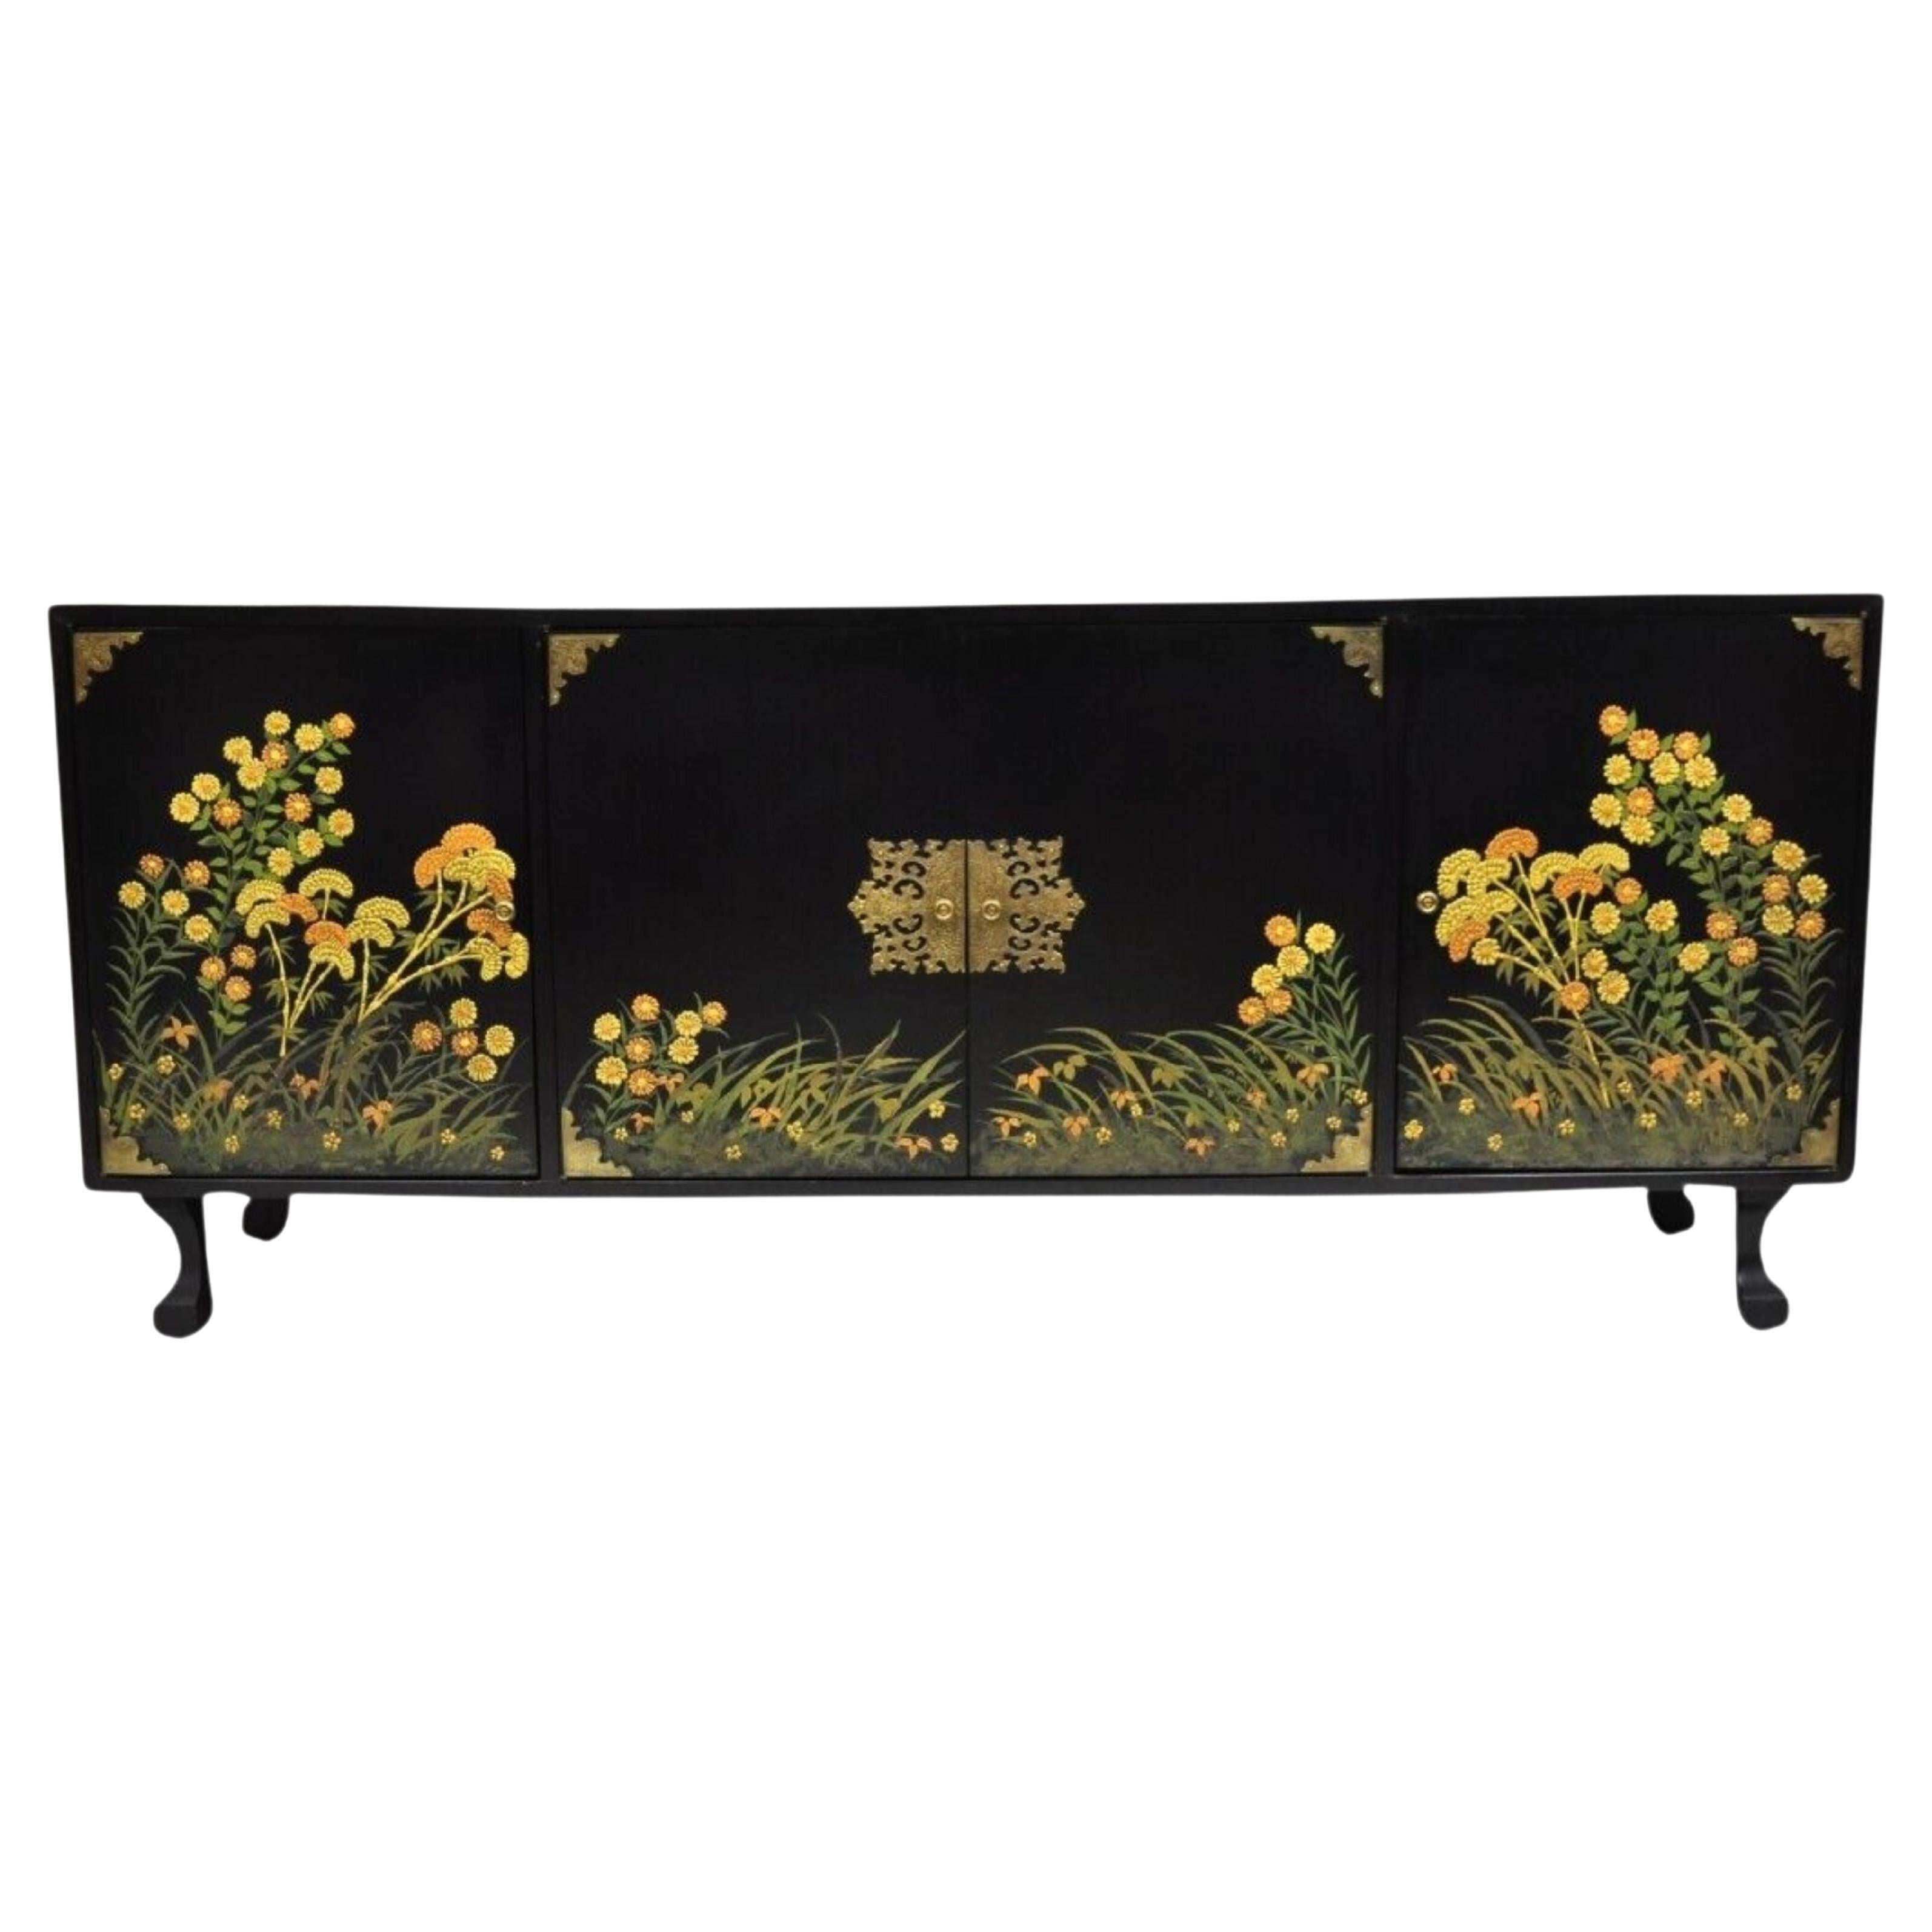 Vintage Chinoiserie Black Lacquer Hand Painted Floral Credenza Cabinet Sideboard For Sale